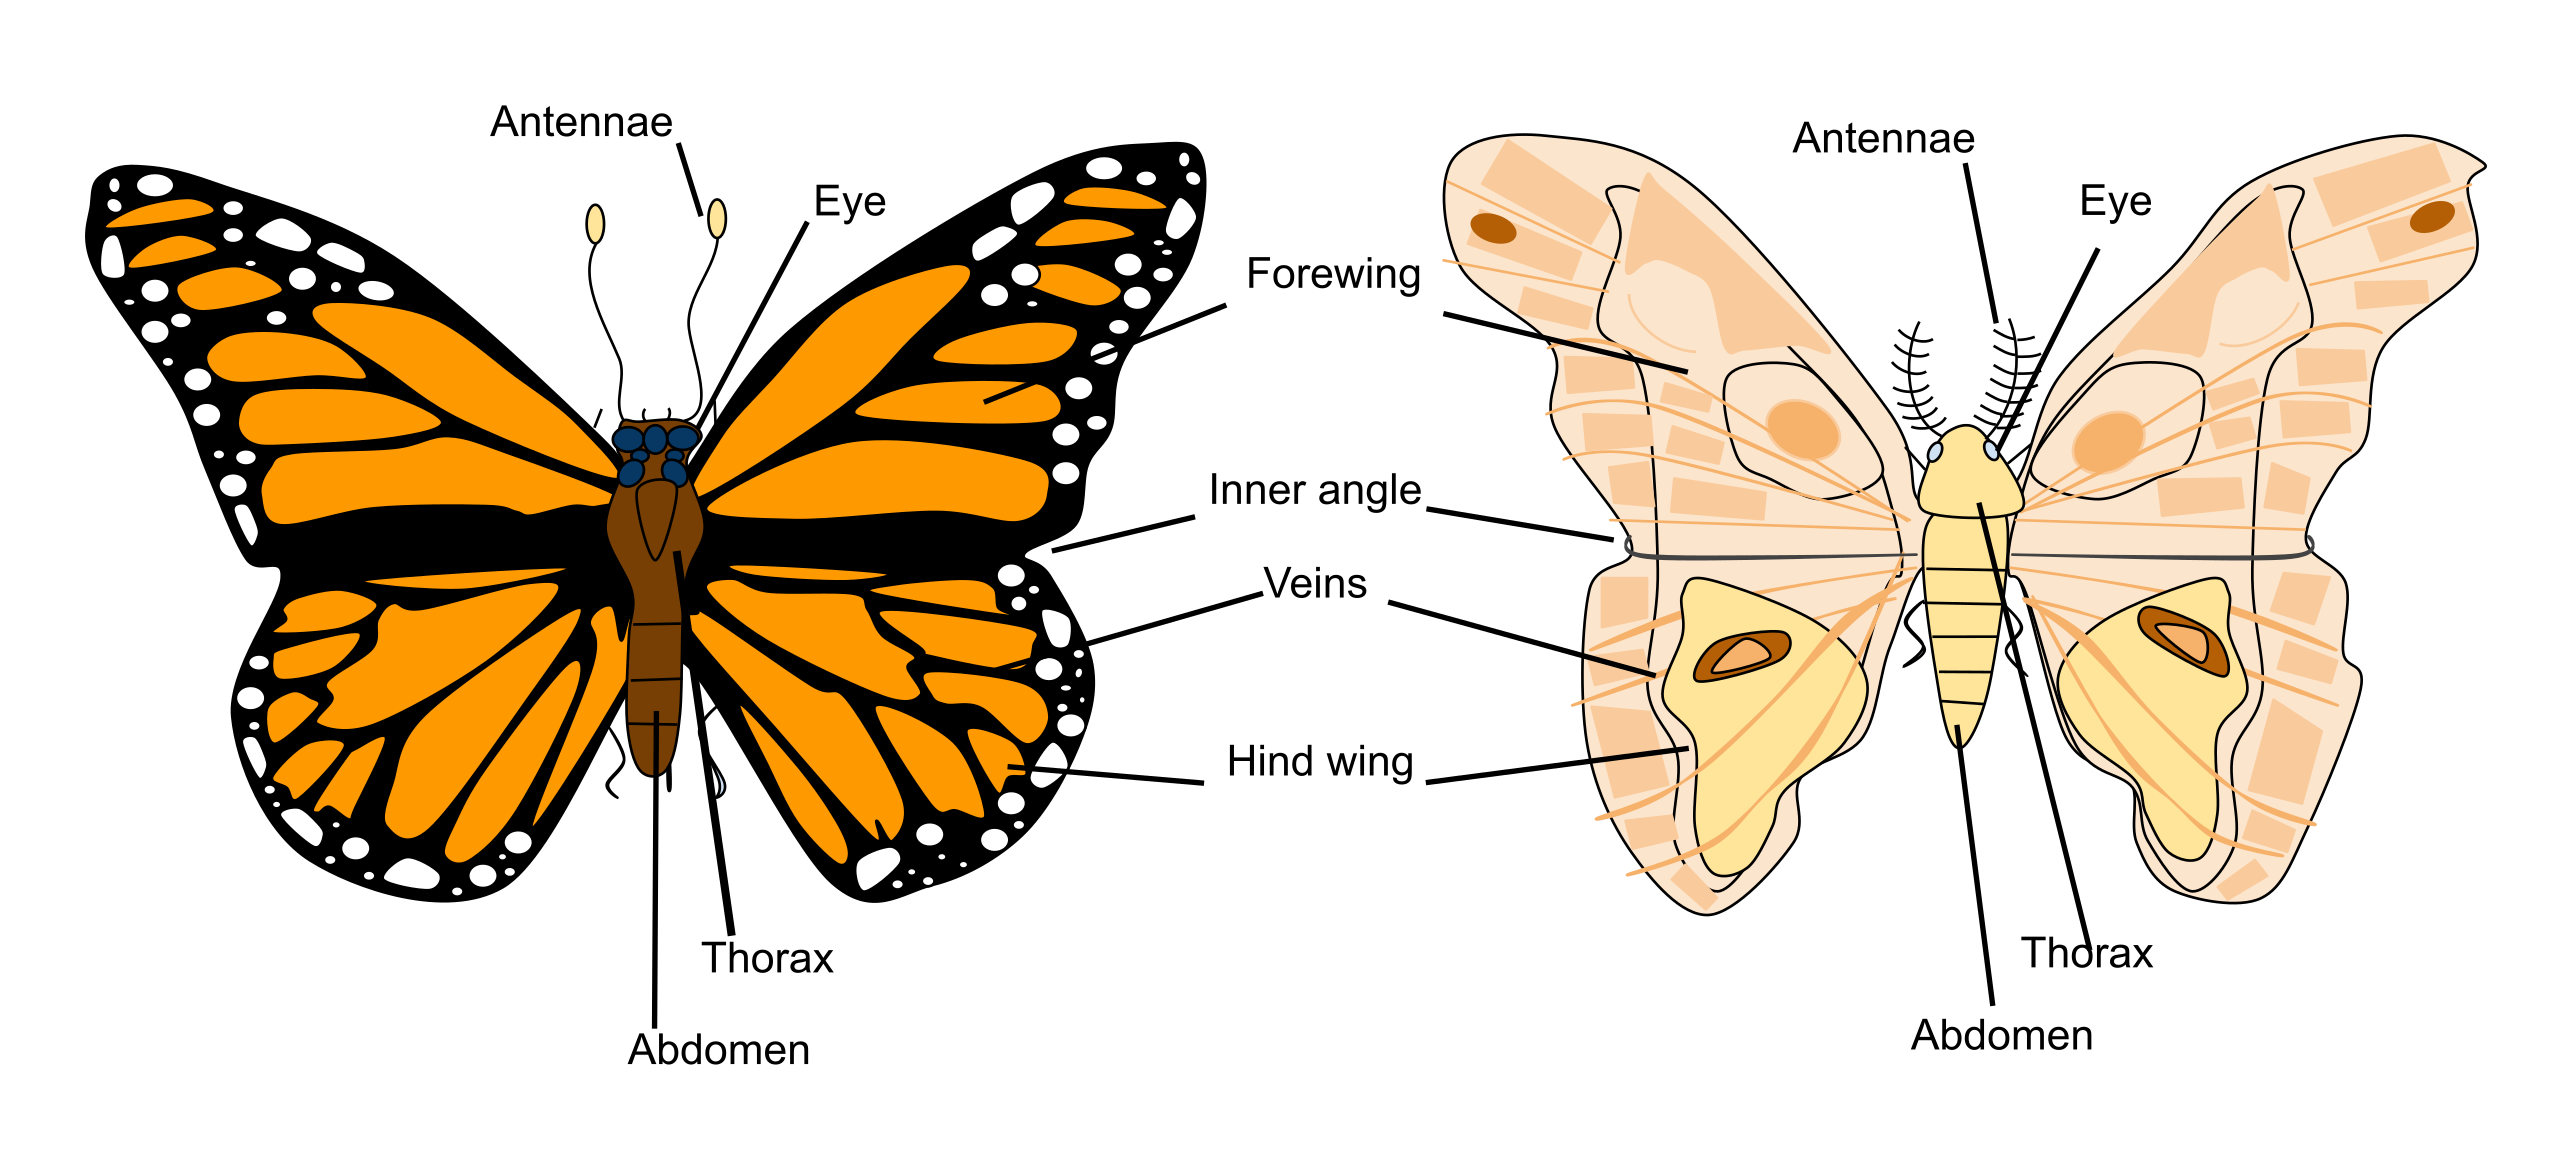 Download File Butterfly Vs Moth Anatomy Svg Wikimedia Commons